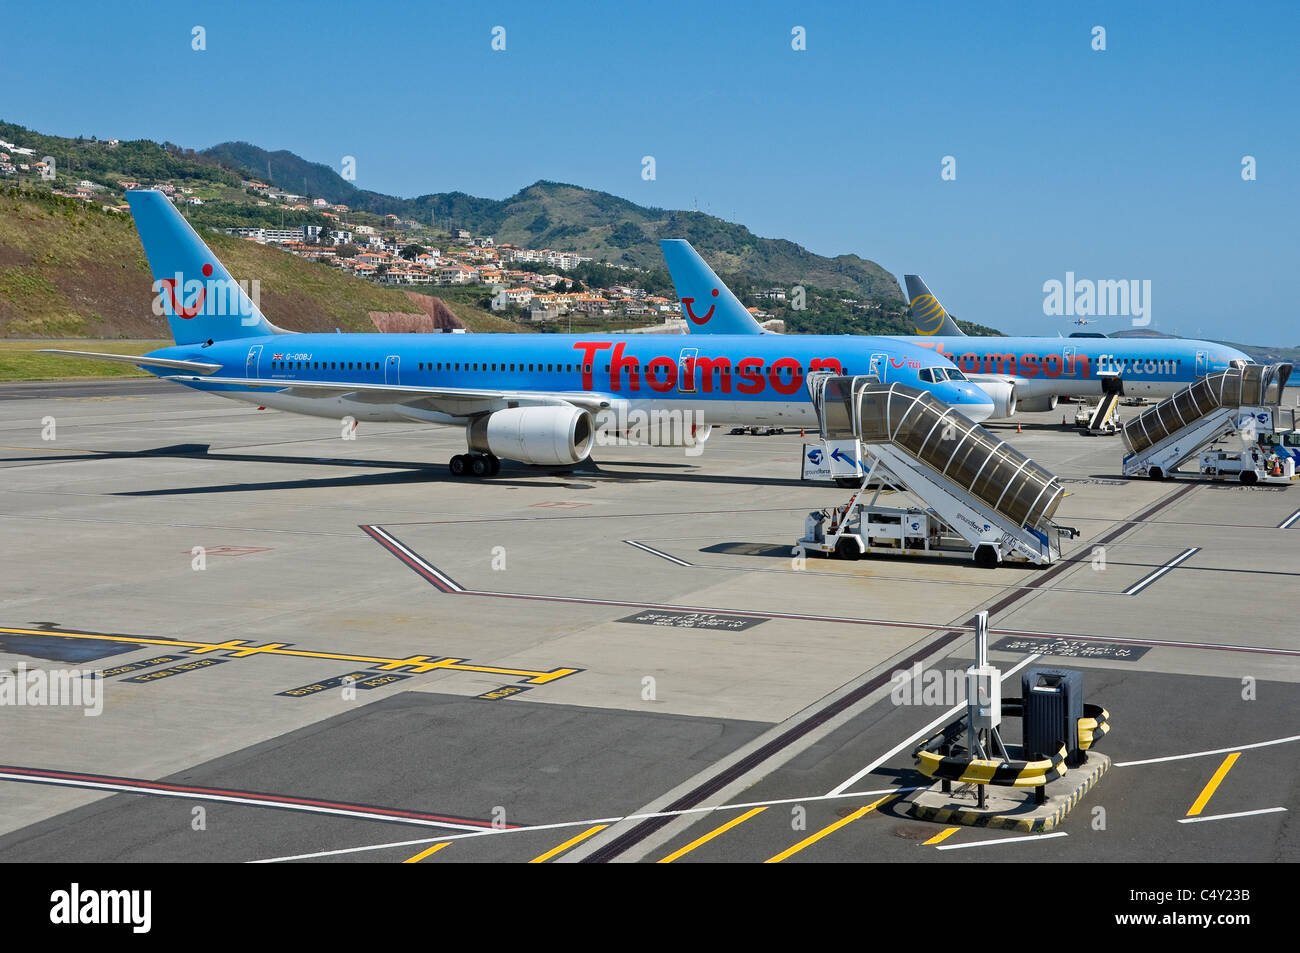 Thomson plane planes airplanes airplane aircraft parked at Funchal airport Madeira Portugal EU Europe Stock Photo